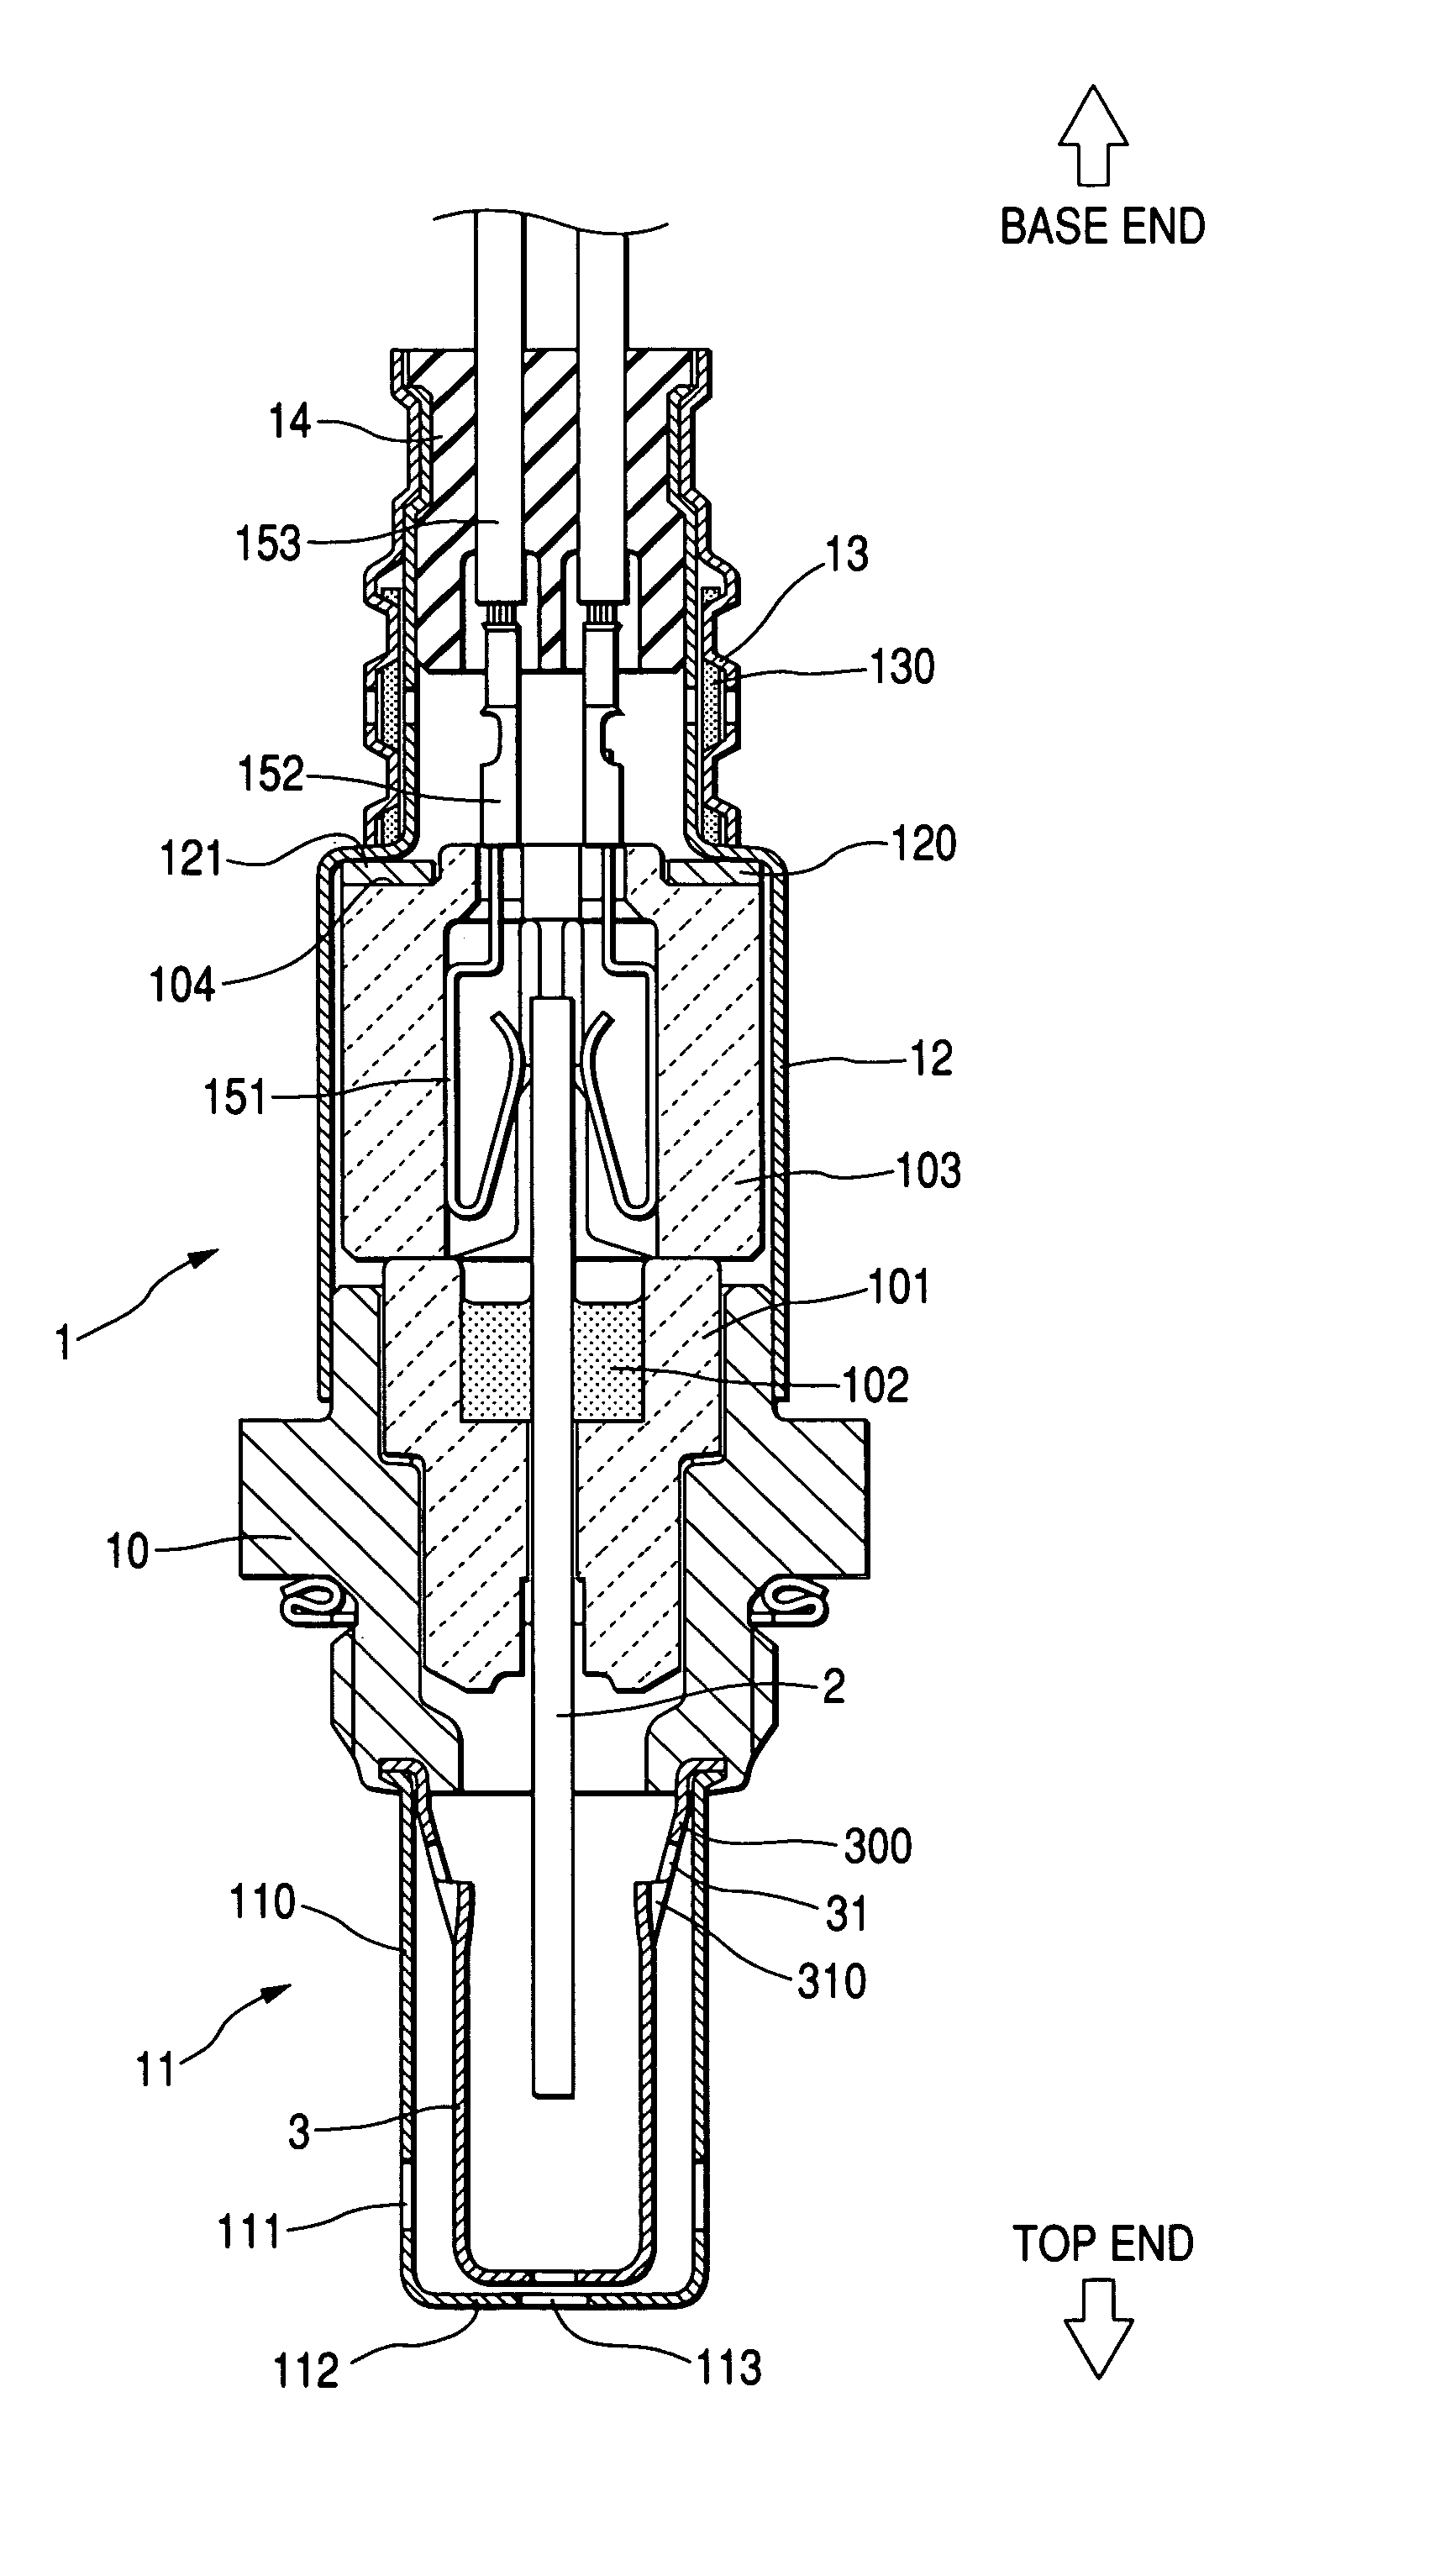 Gas sensor equipped with gas inlet designed to create desired flow of gas